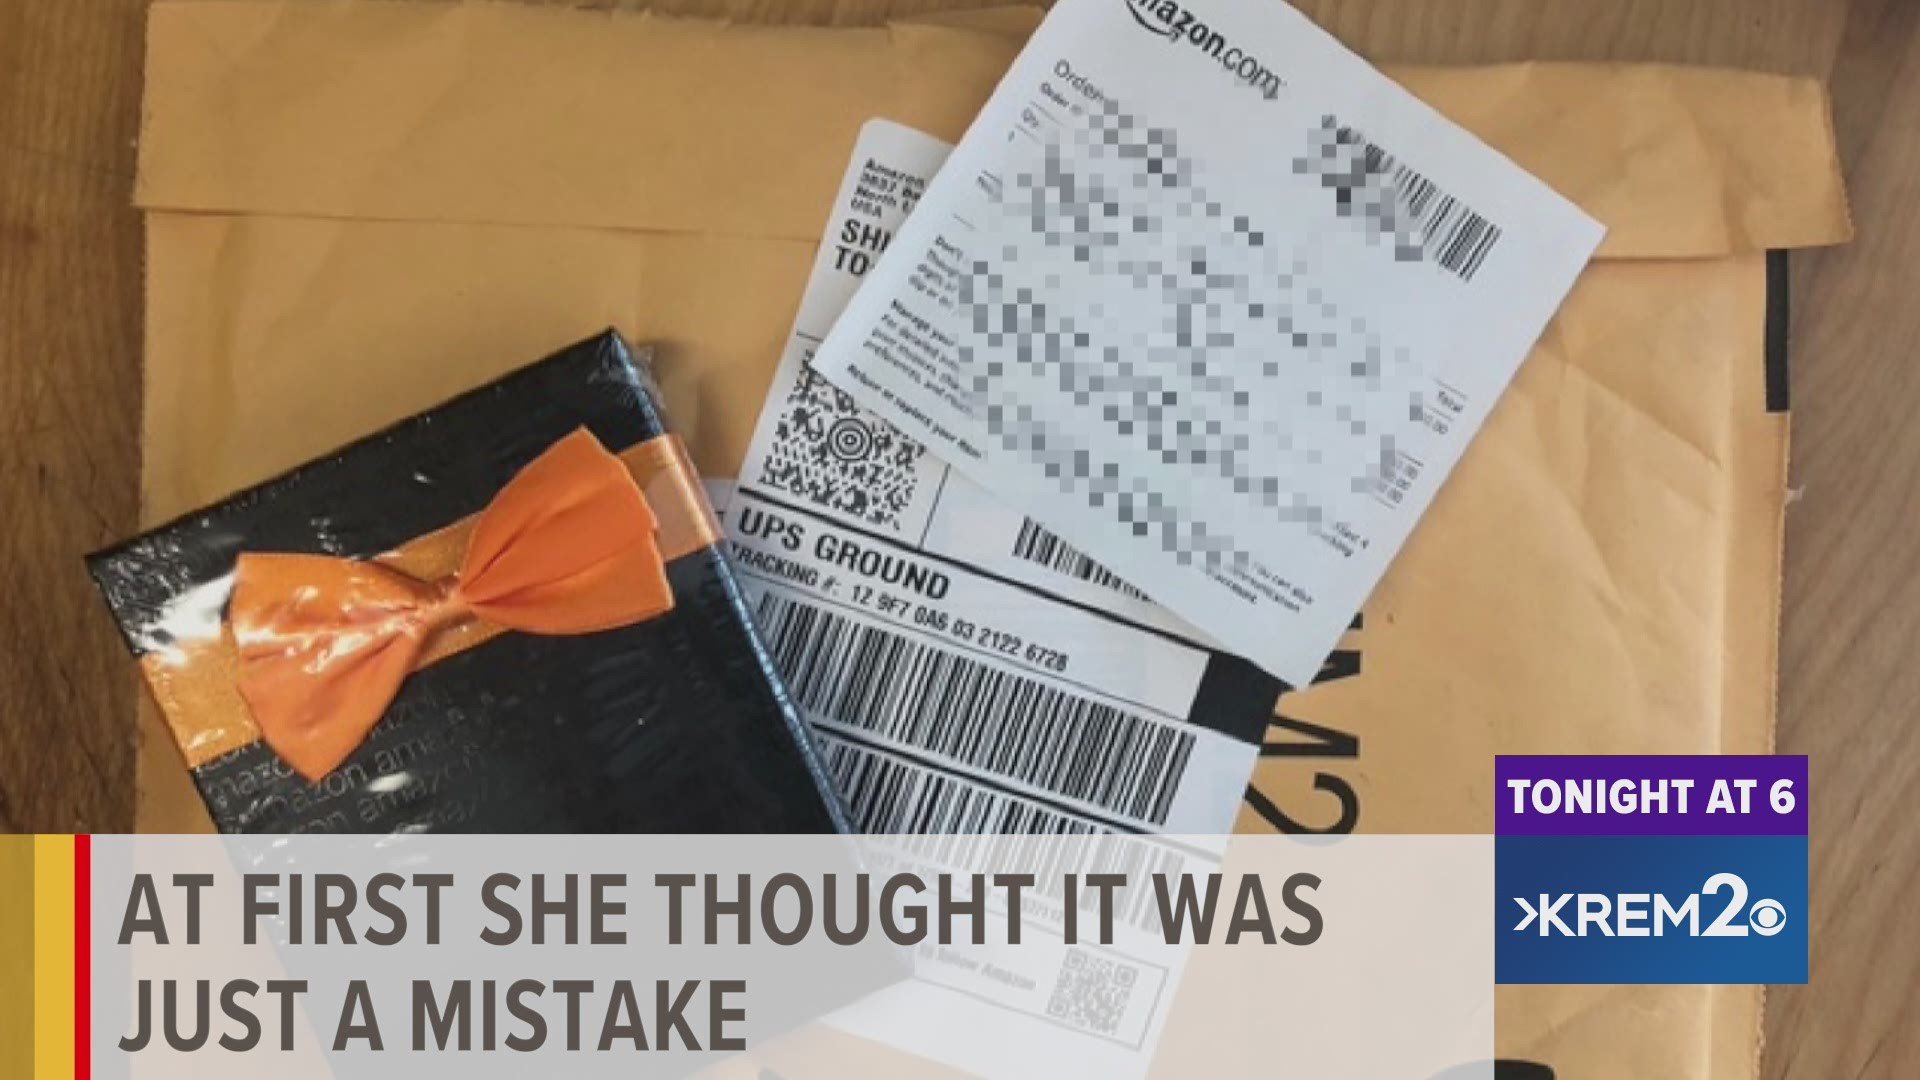 Imagine packages you never ordered keep coming to your door. Not only that, you're getting charged for these unwanted deliveries.